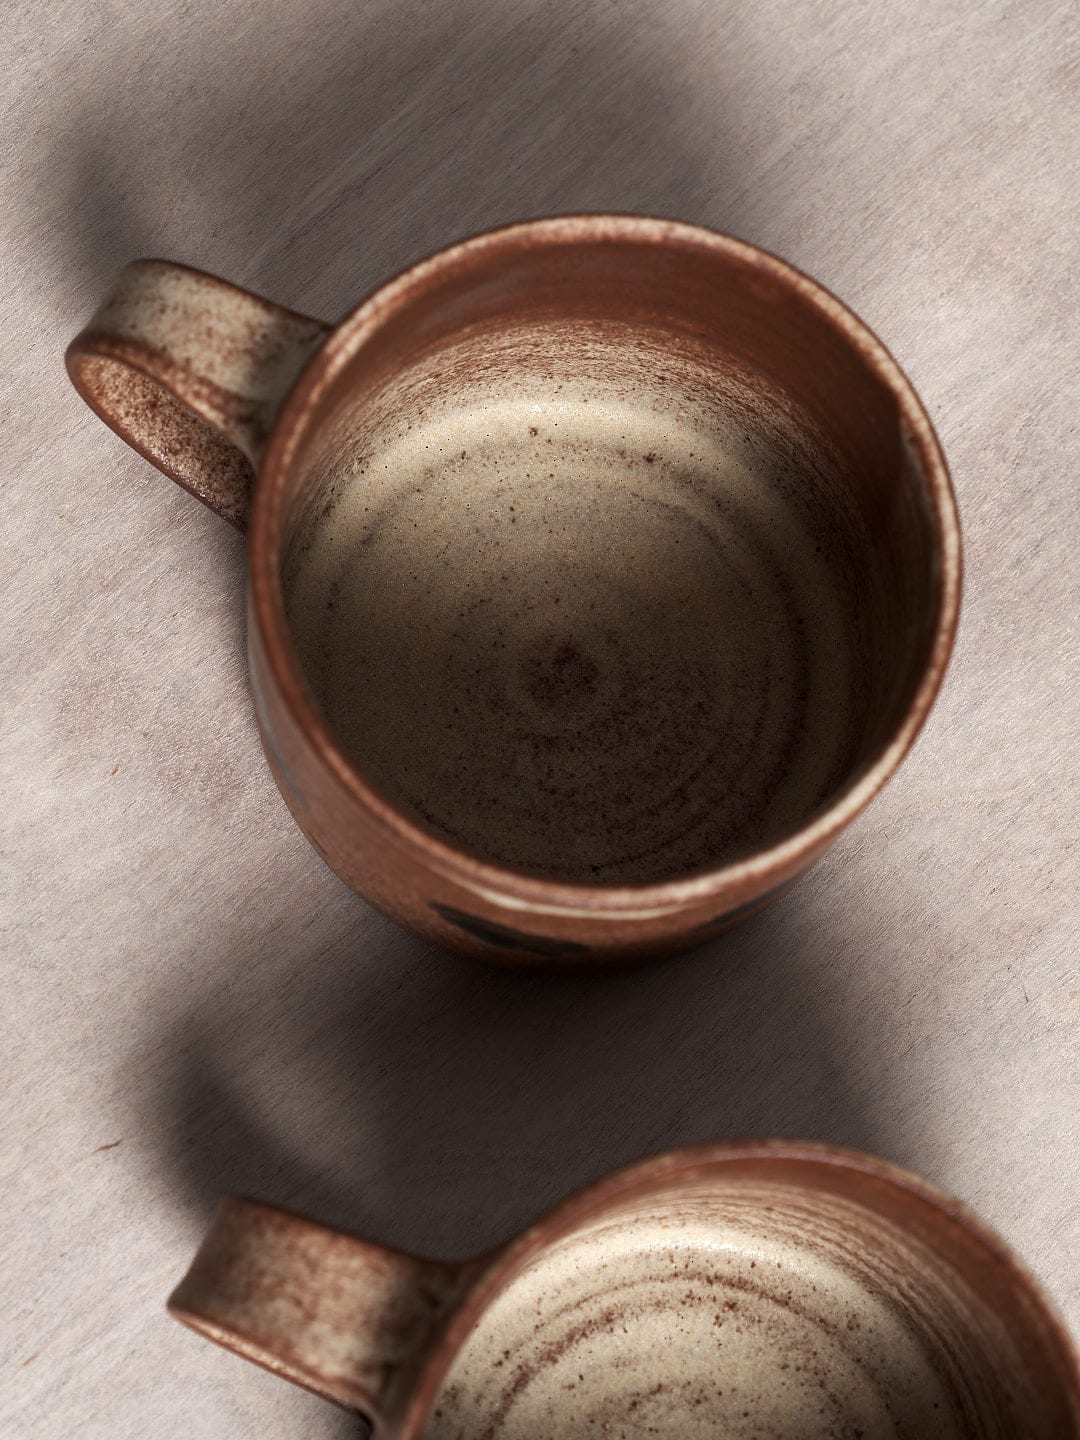 Two handmade brown Spots mugs with a matte cream glaze on a wooden surface.